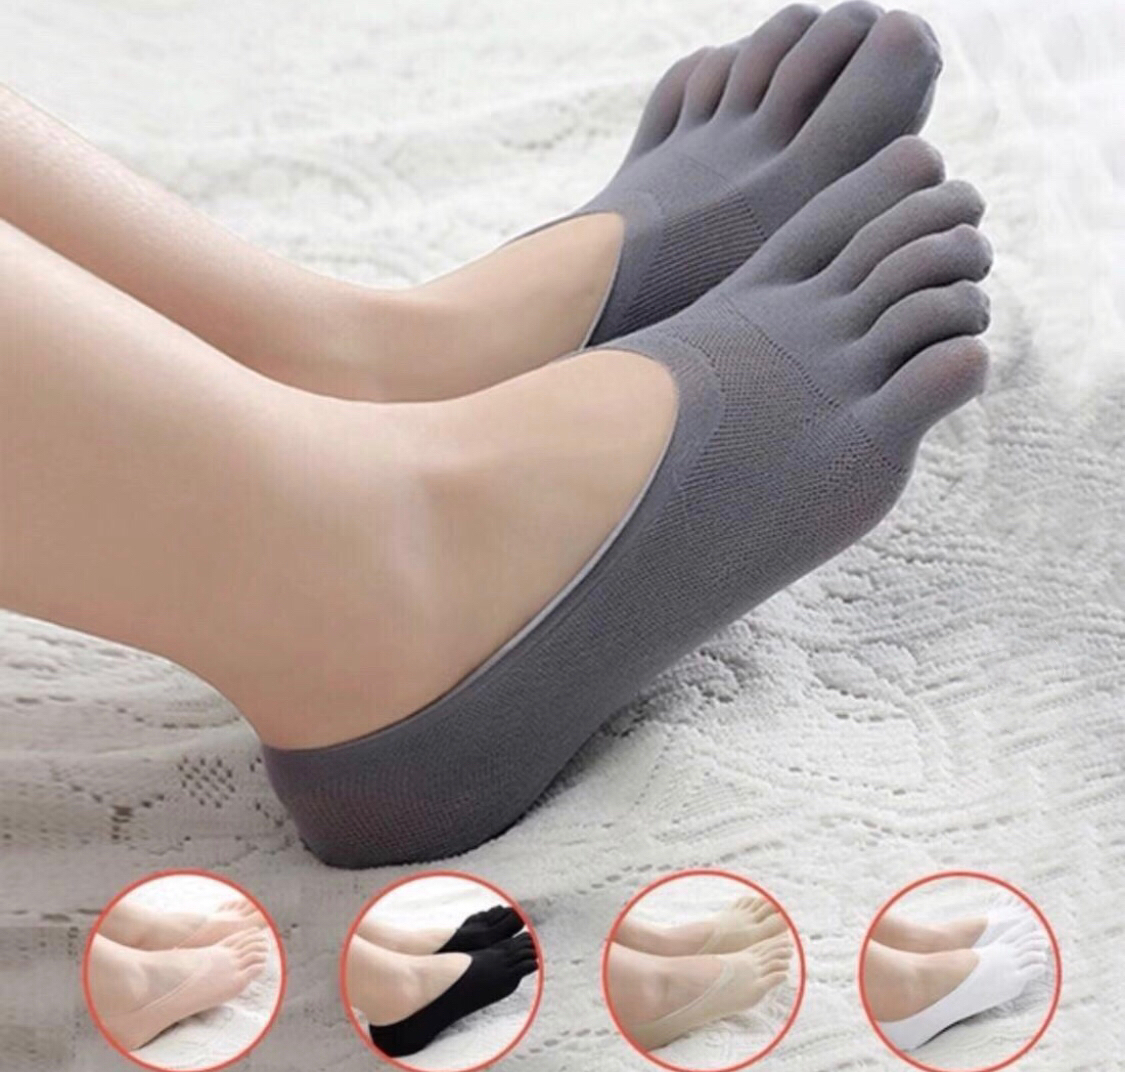 M/XL Fit Unisex Knee-High Compression Stockings Varicose Veins Open Toe Stockings  Compression stockings may help to reduce the appearance and painful  symptoms with varicose veins in some people. often recommend compression  stockings